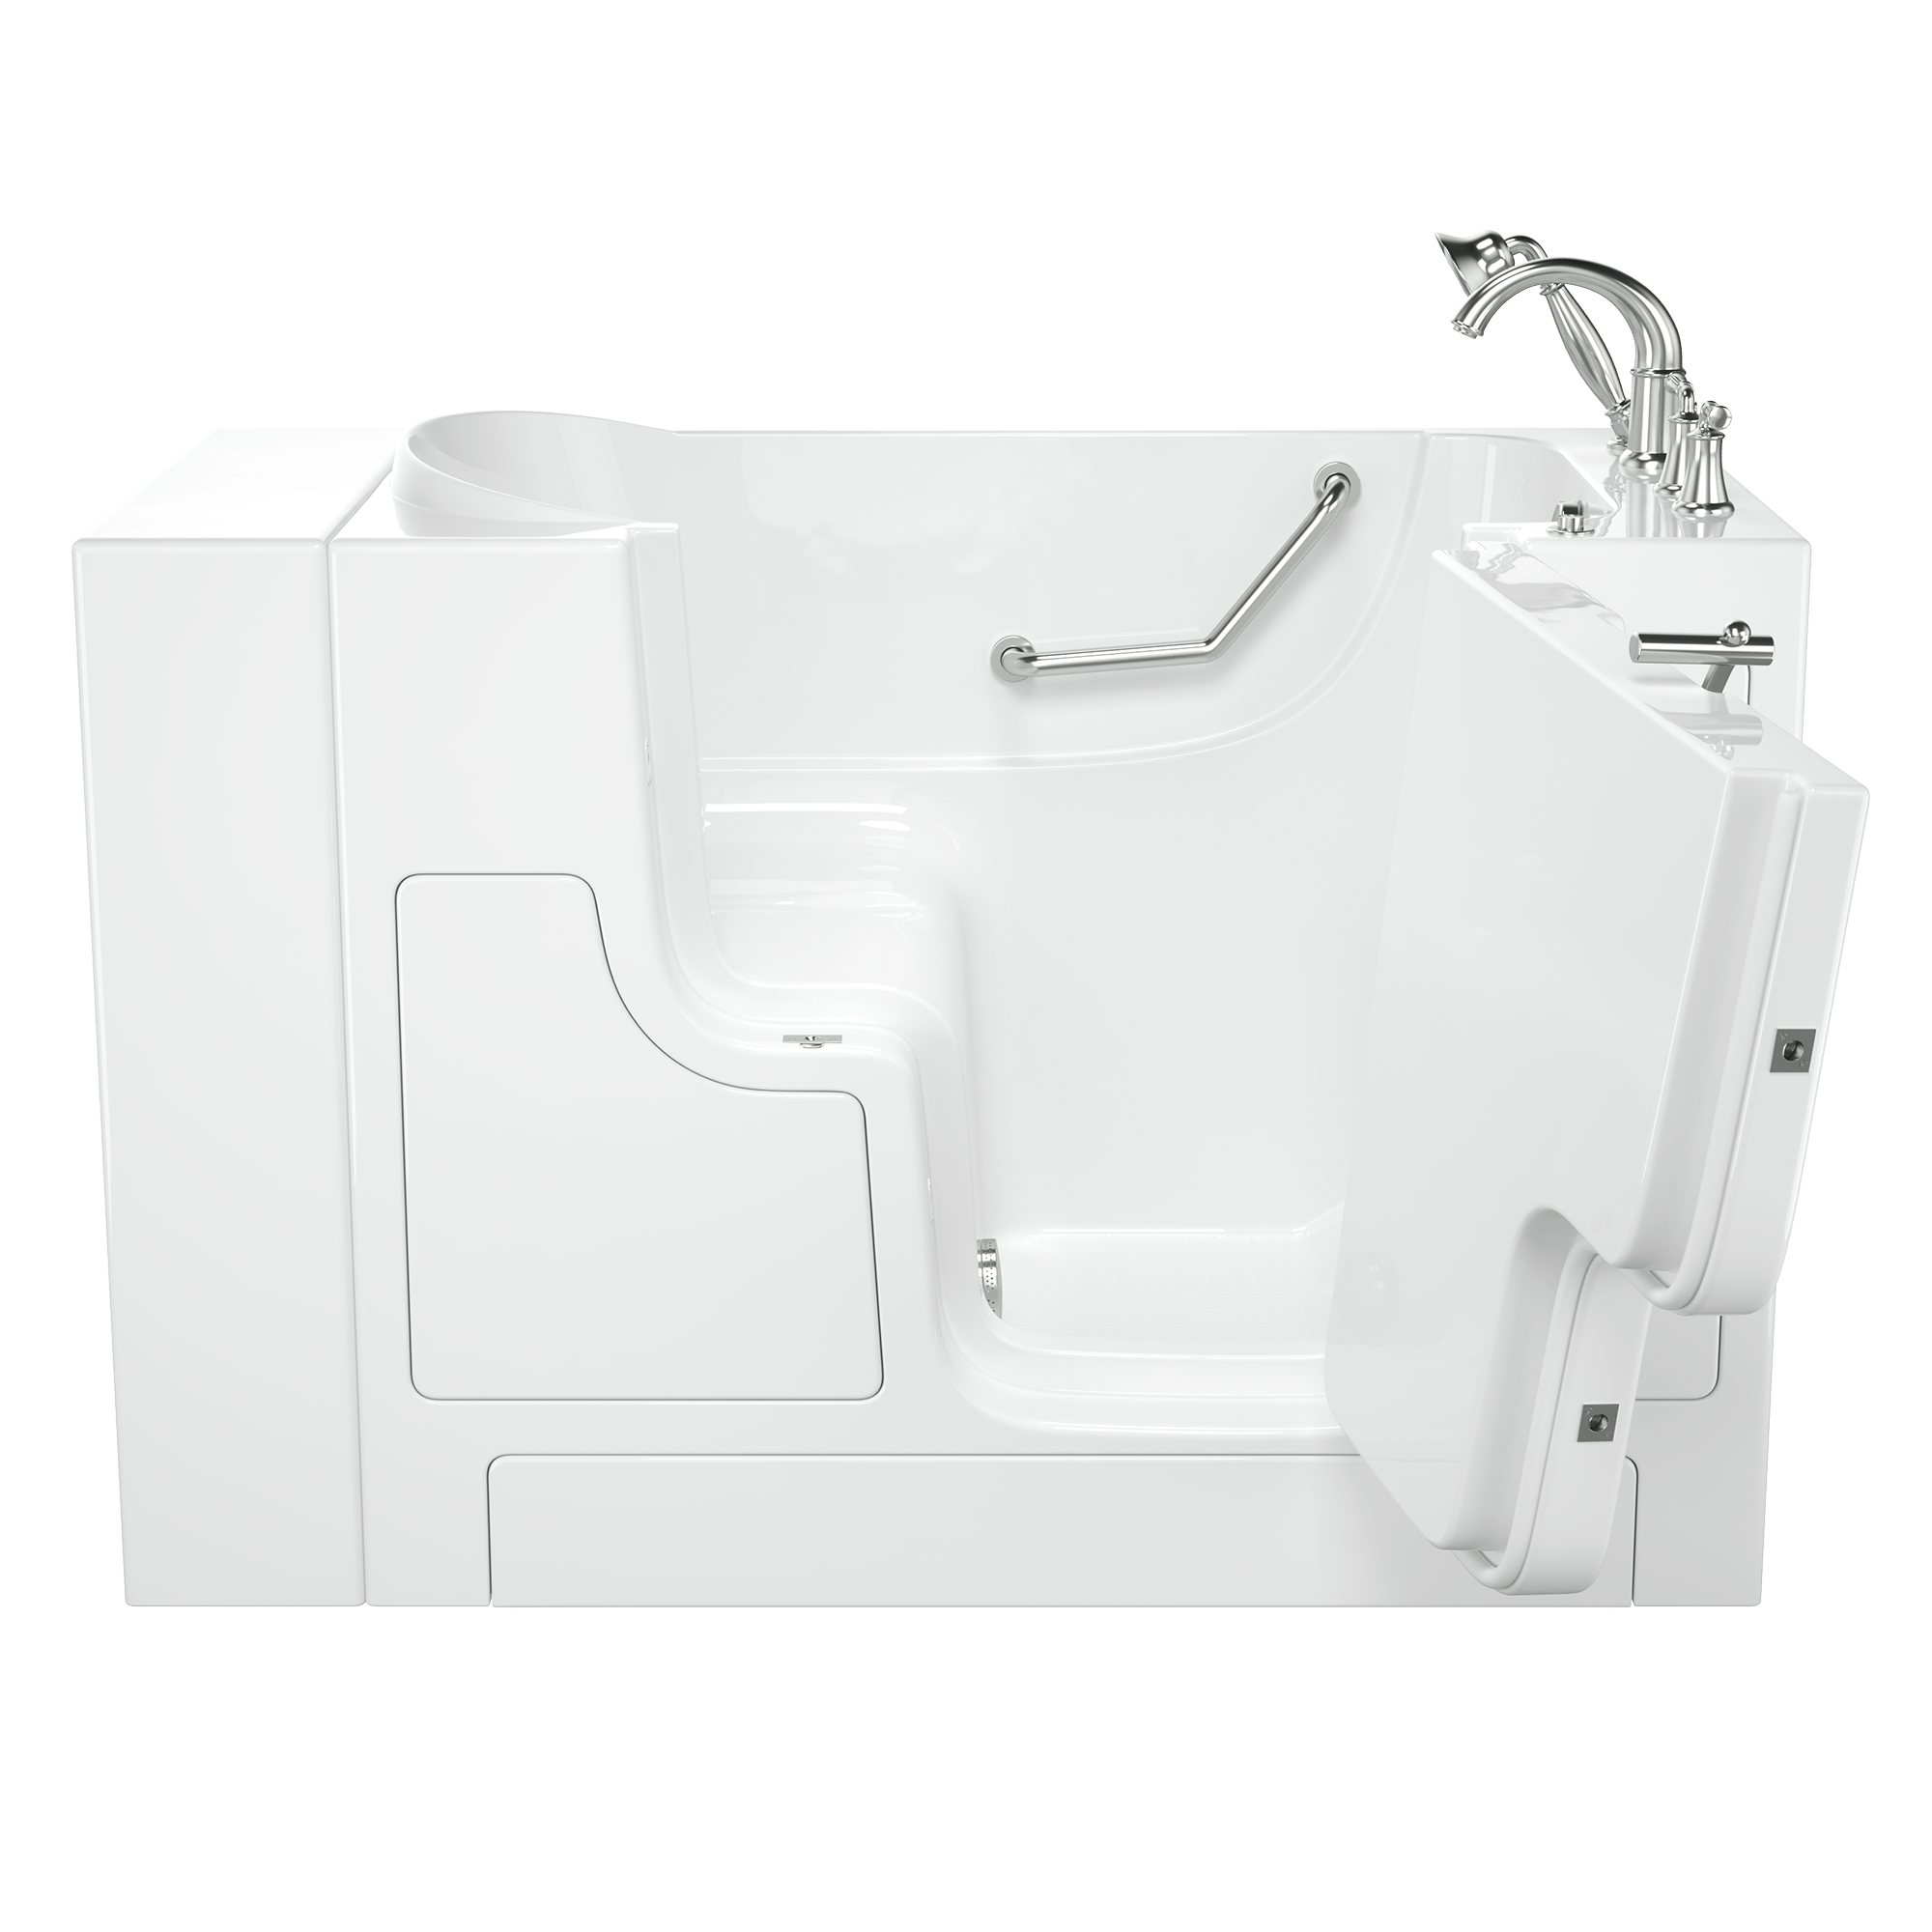 Gelcoat Value Series 30 x 52  Inch Walk in Tub With Soaker System   Right Hand Drain With Faucet WIB WHITE